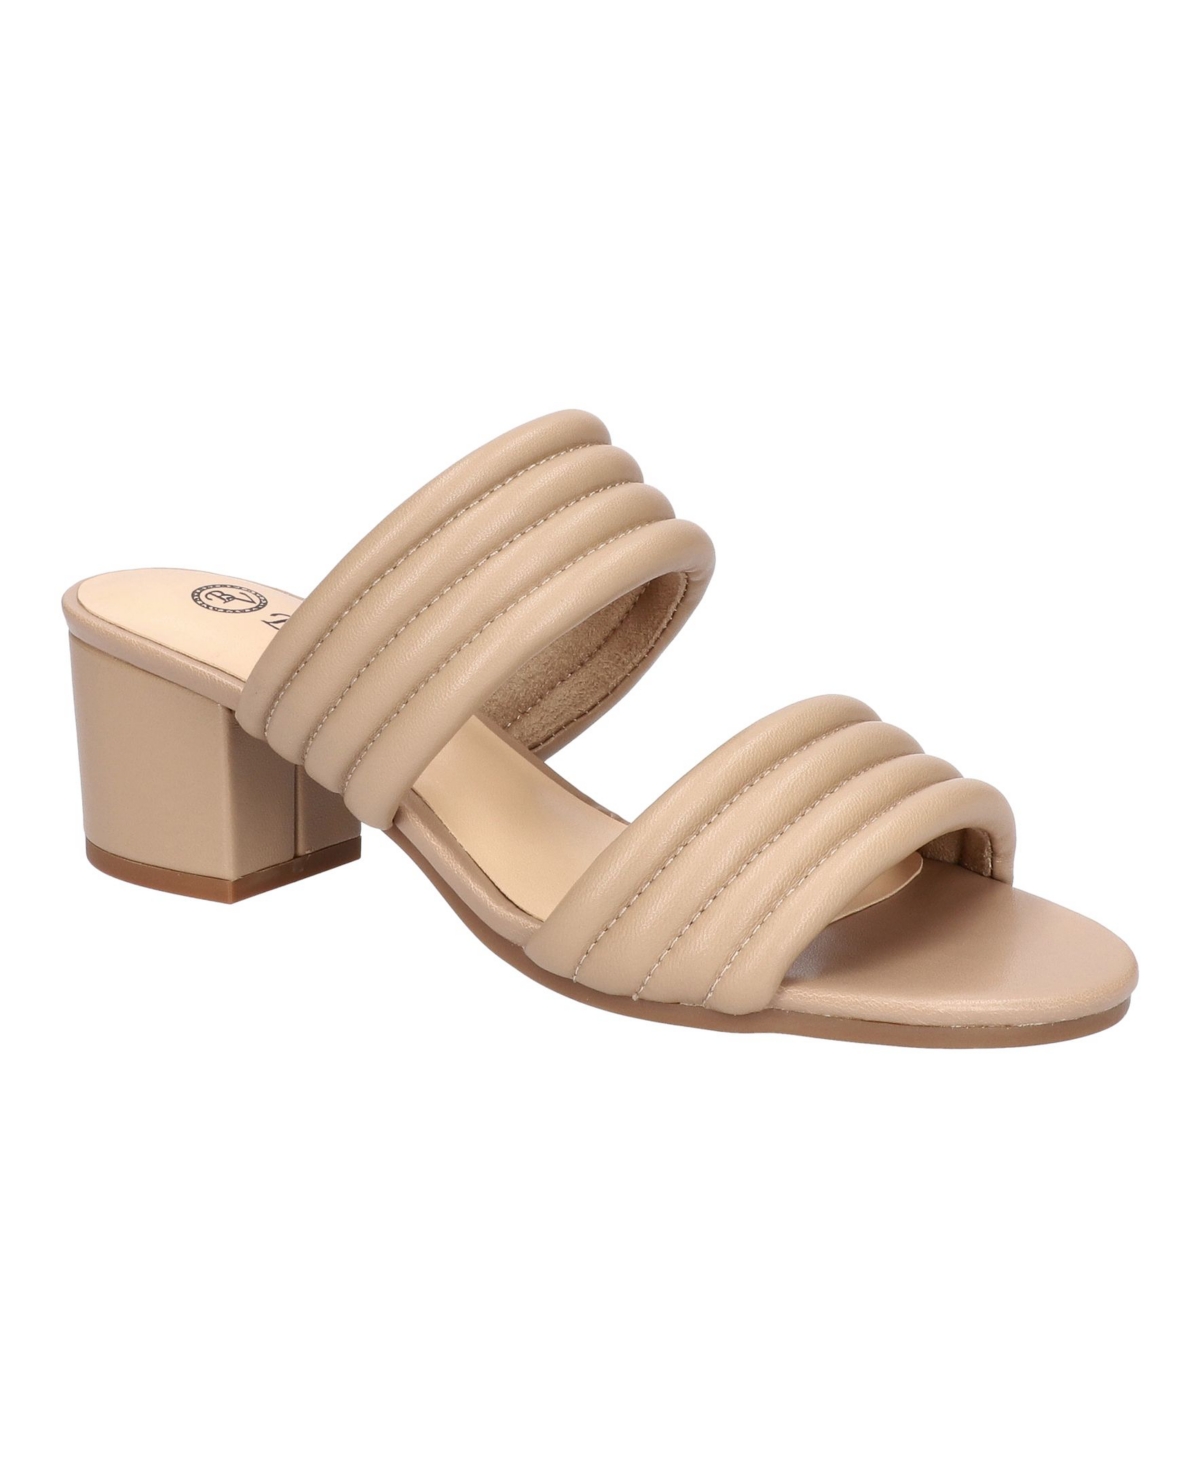 Women's Georgette Heeled Sandals - Nude Leather